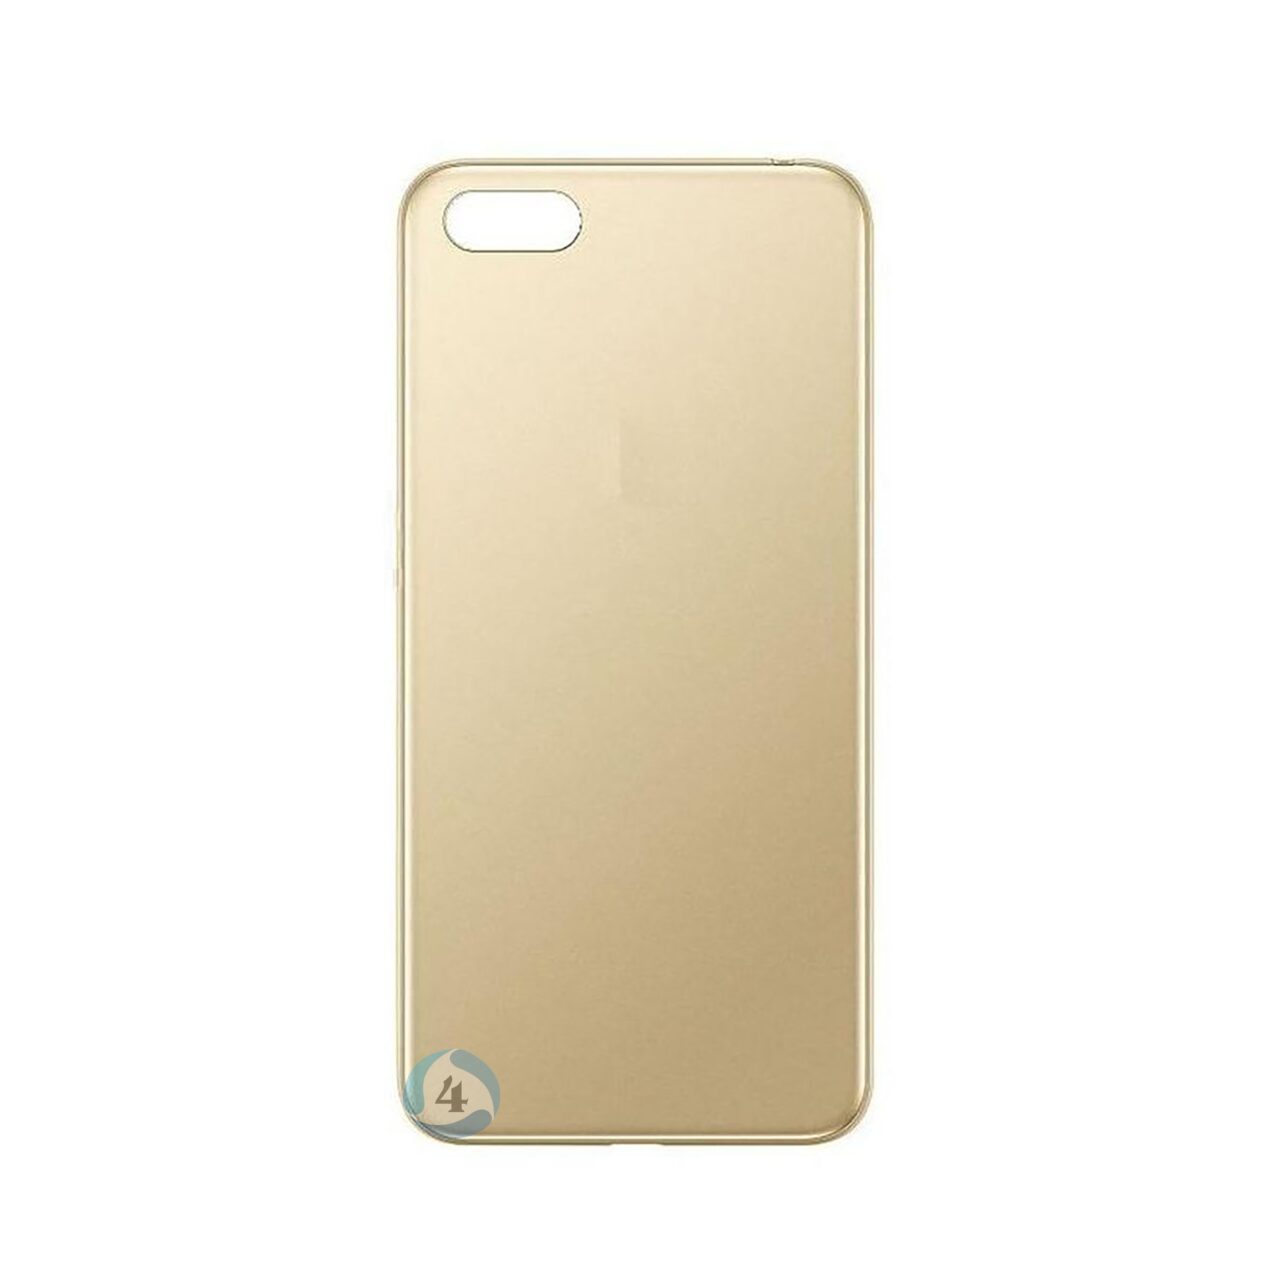 Huawei Y5 Prime 2018 backcover gold